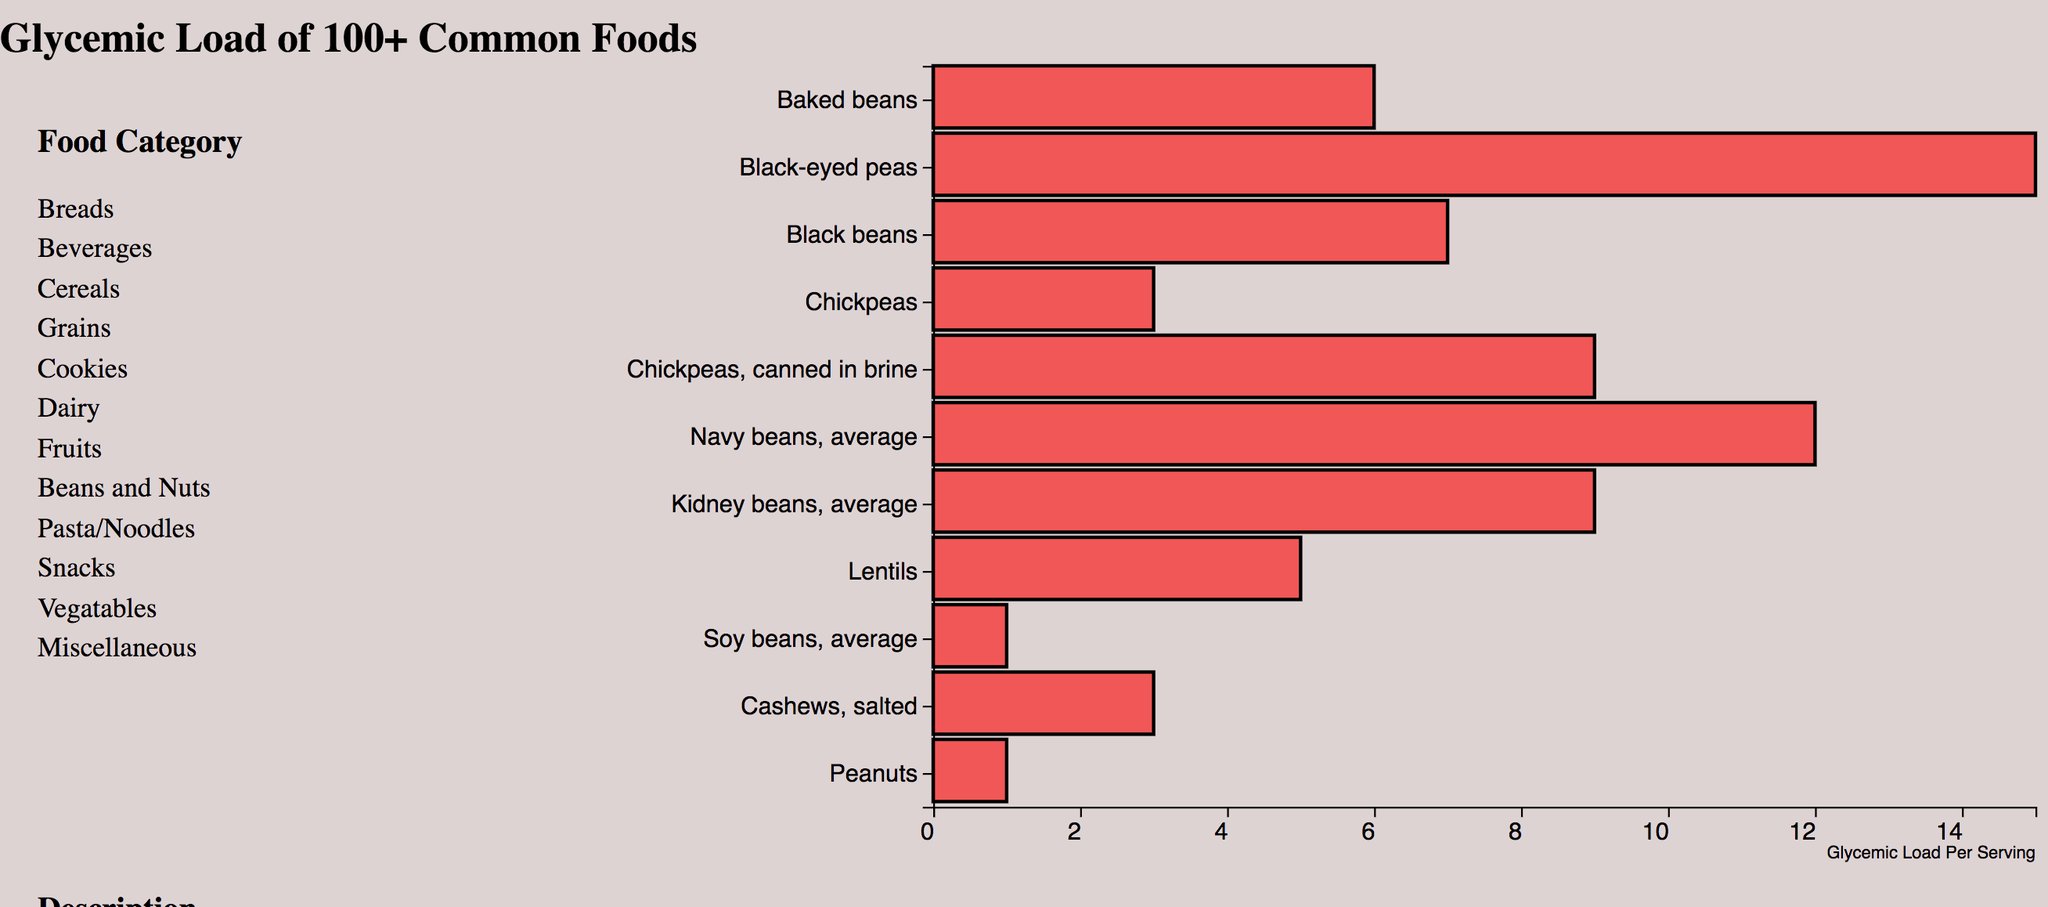 Data Vis: Glycemic Load of Common Foods